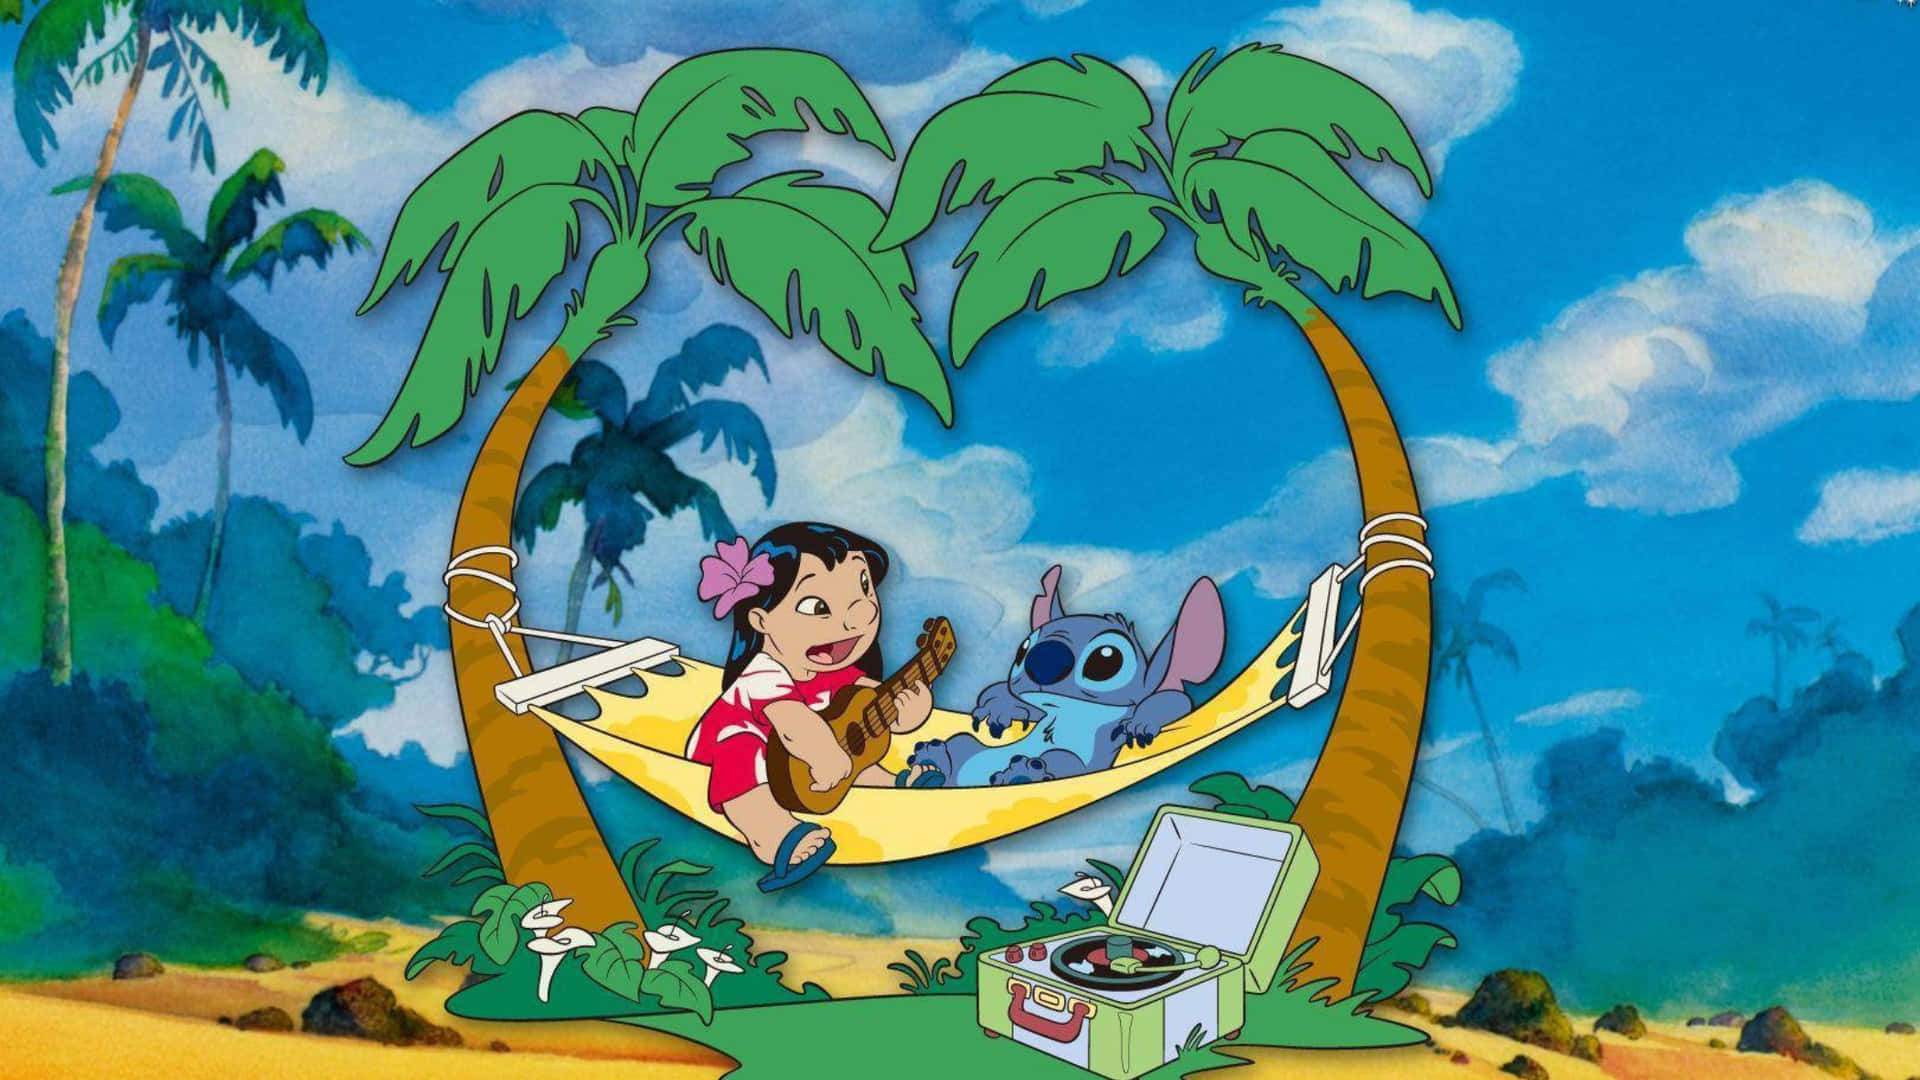 When Two Worlds Collide - Stitch and Lilo Enjoy A Moment Together